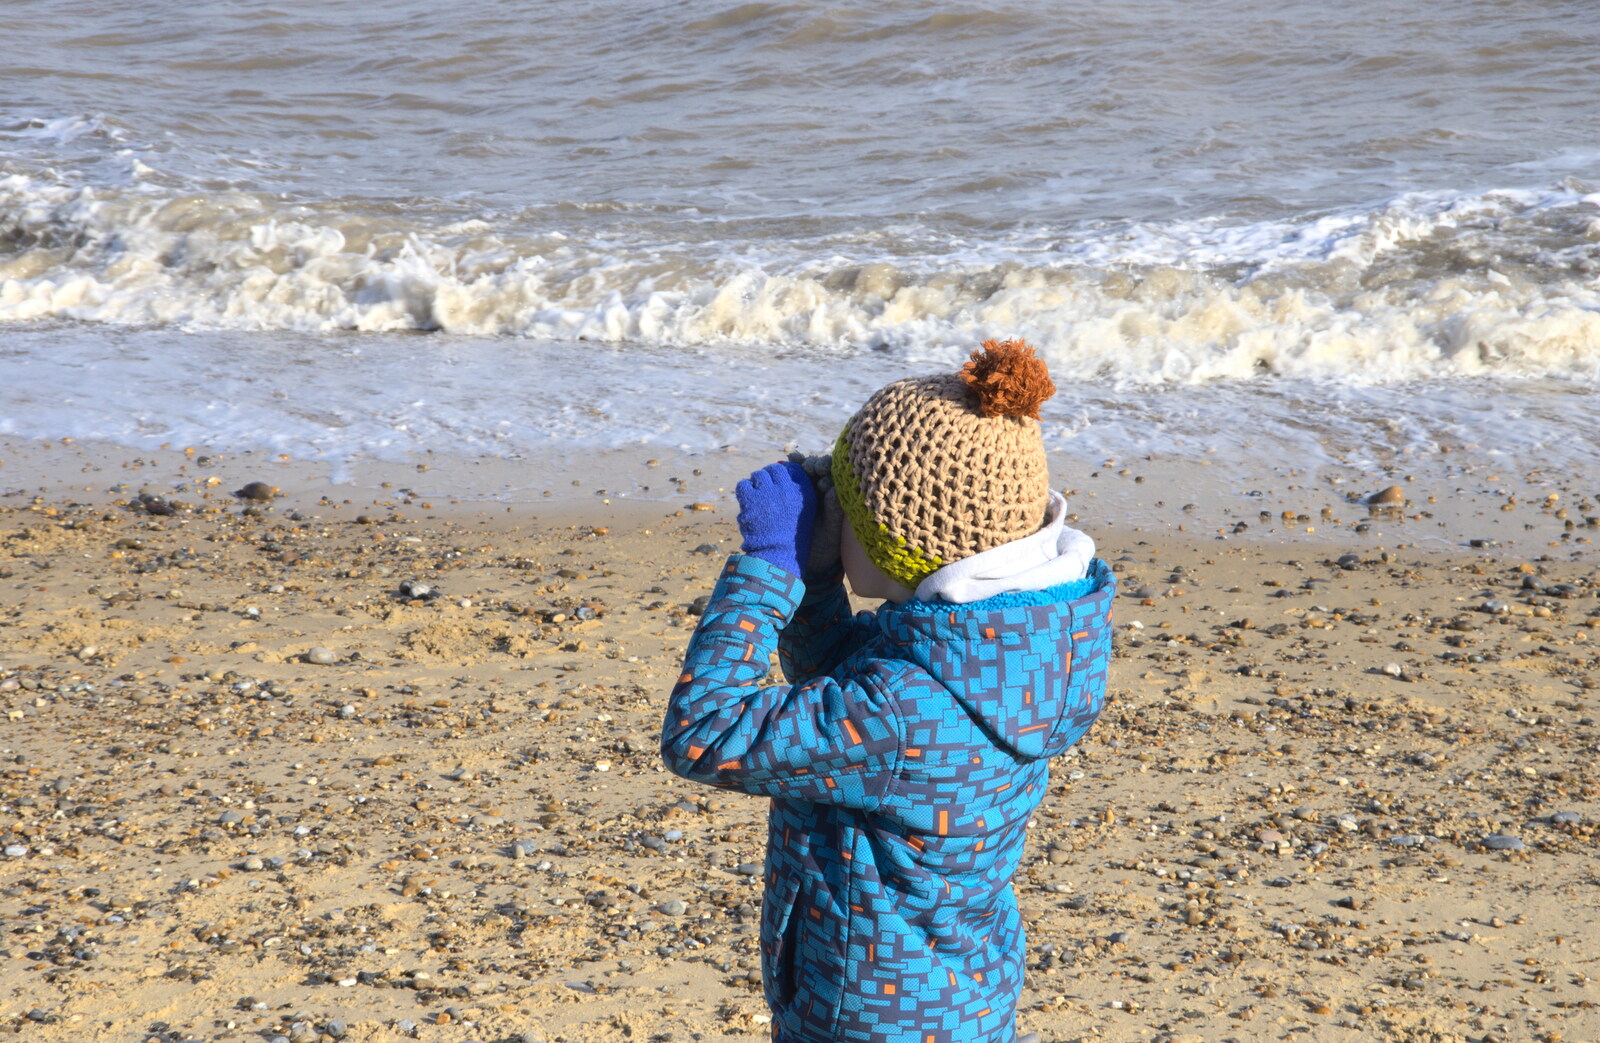 Harry makes binoculars out of his hands from A Trip to Dunwich Heath, Dunwich, Suffolk - 17th February 2019